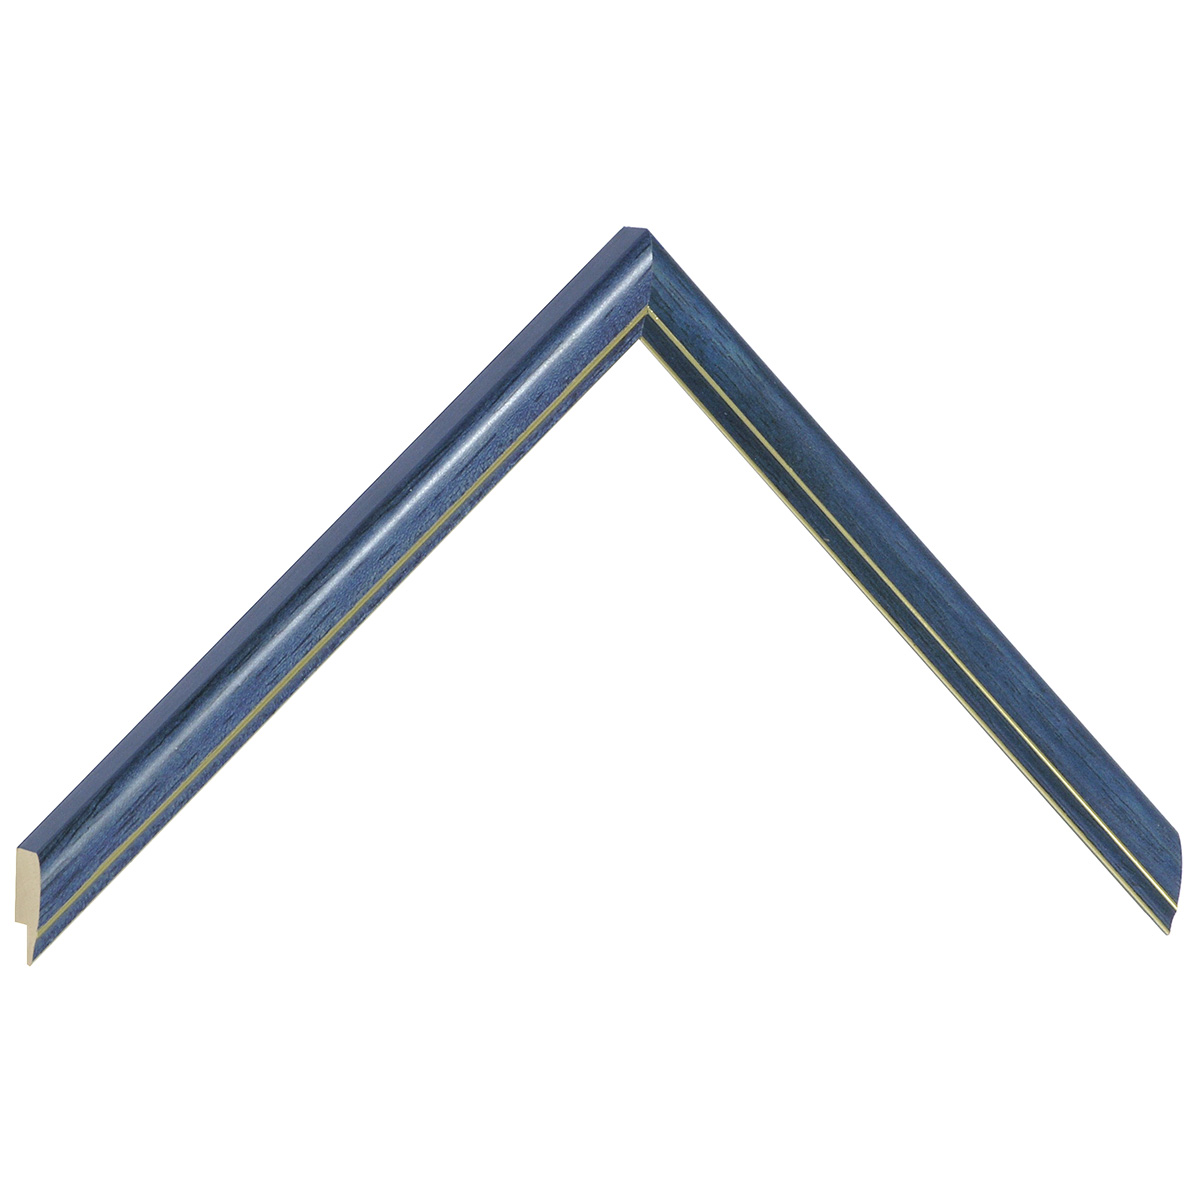 Moulding ayous jointed 13mm - blue with golden edge - Sample